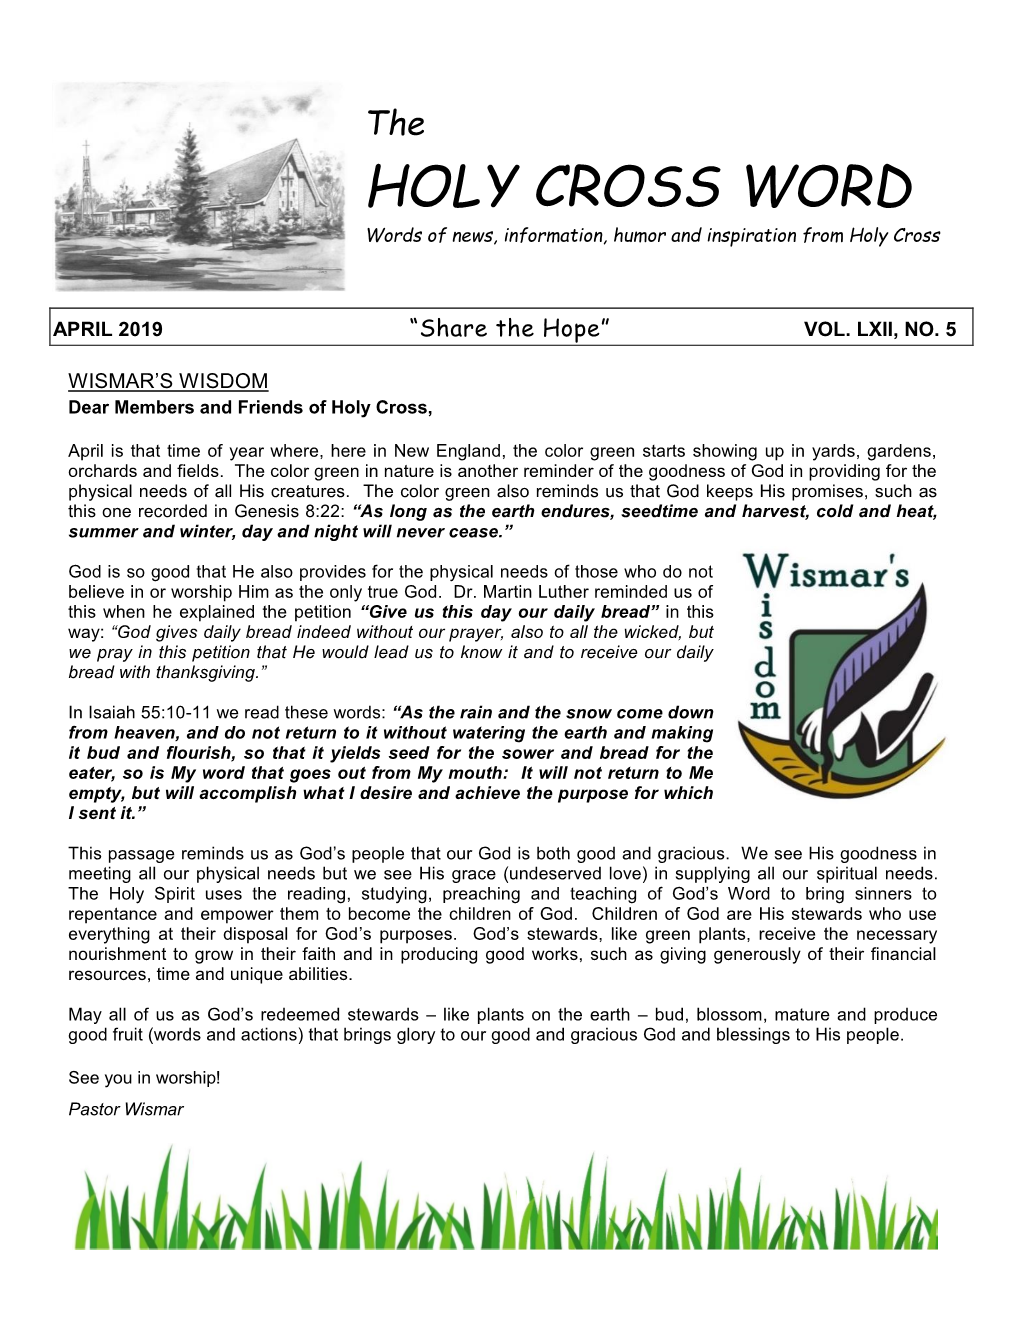 HOLY CROSS WORD Words of News, Information, Humor and Inspiration from Holy Cross